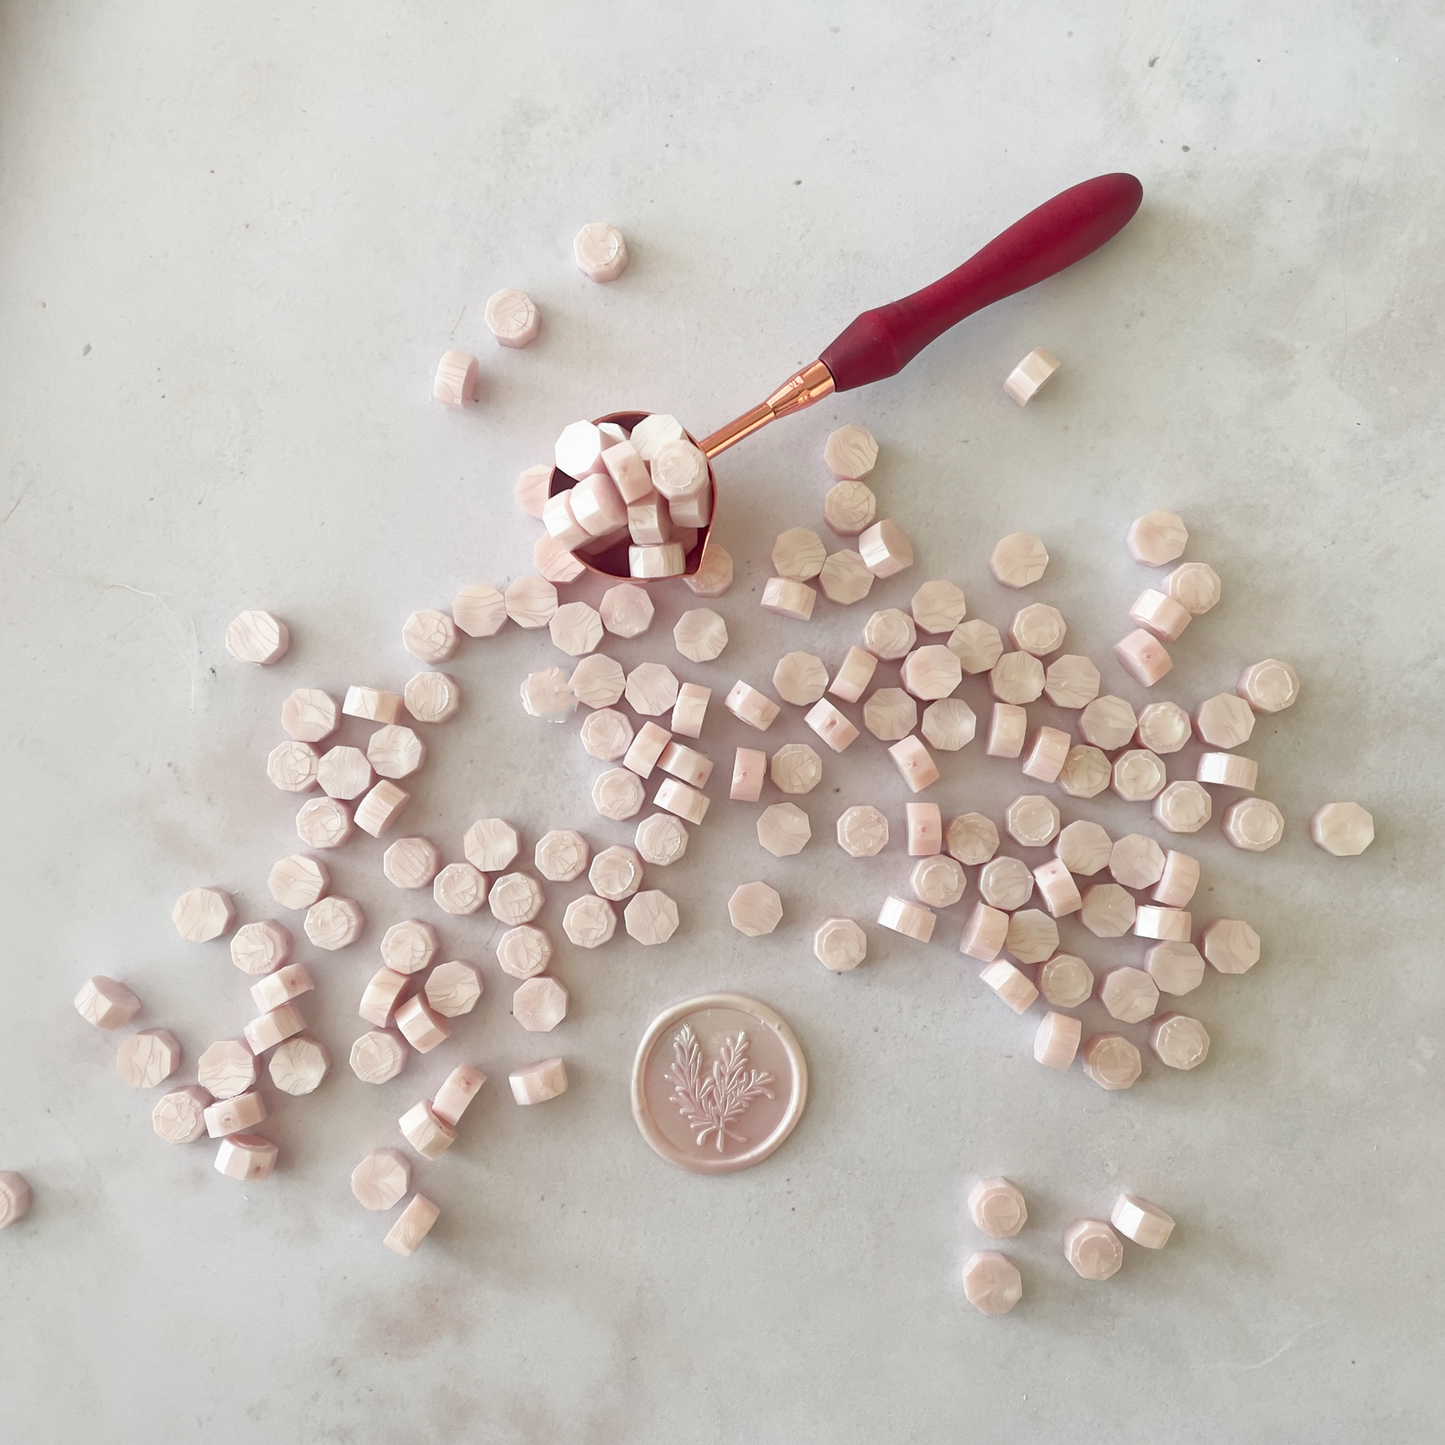 blush pink sealing wax beads.  Small wax beads for making wax stamps and seals.  Plastic free wax beads to use with a melting spoon